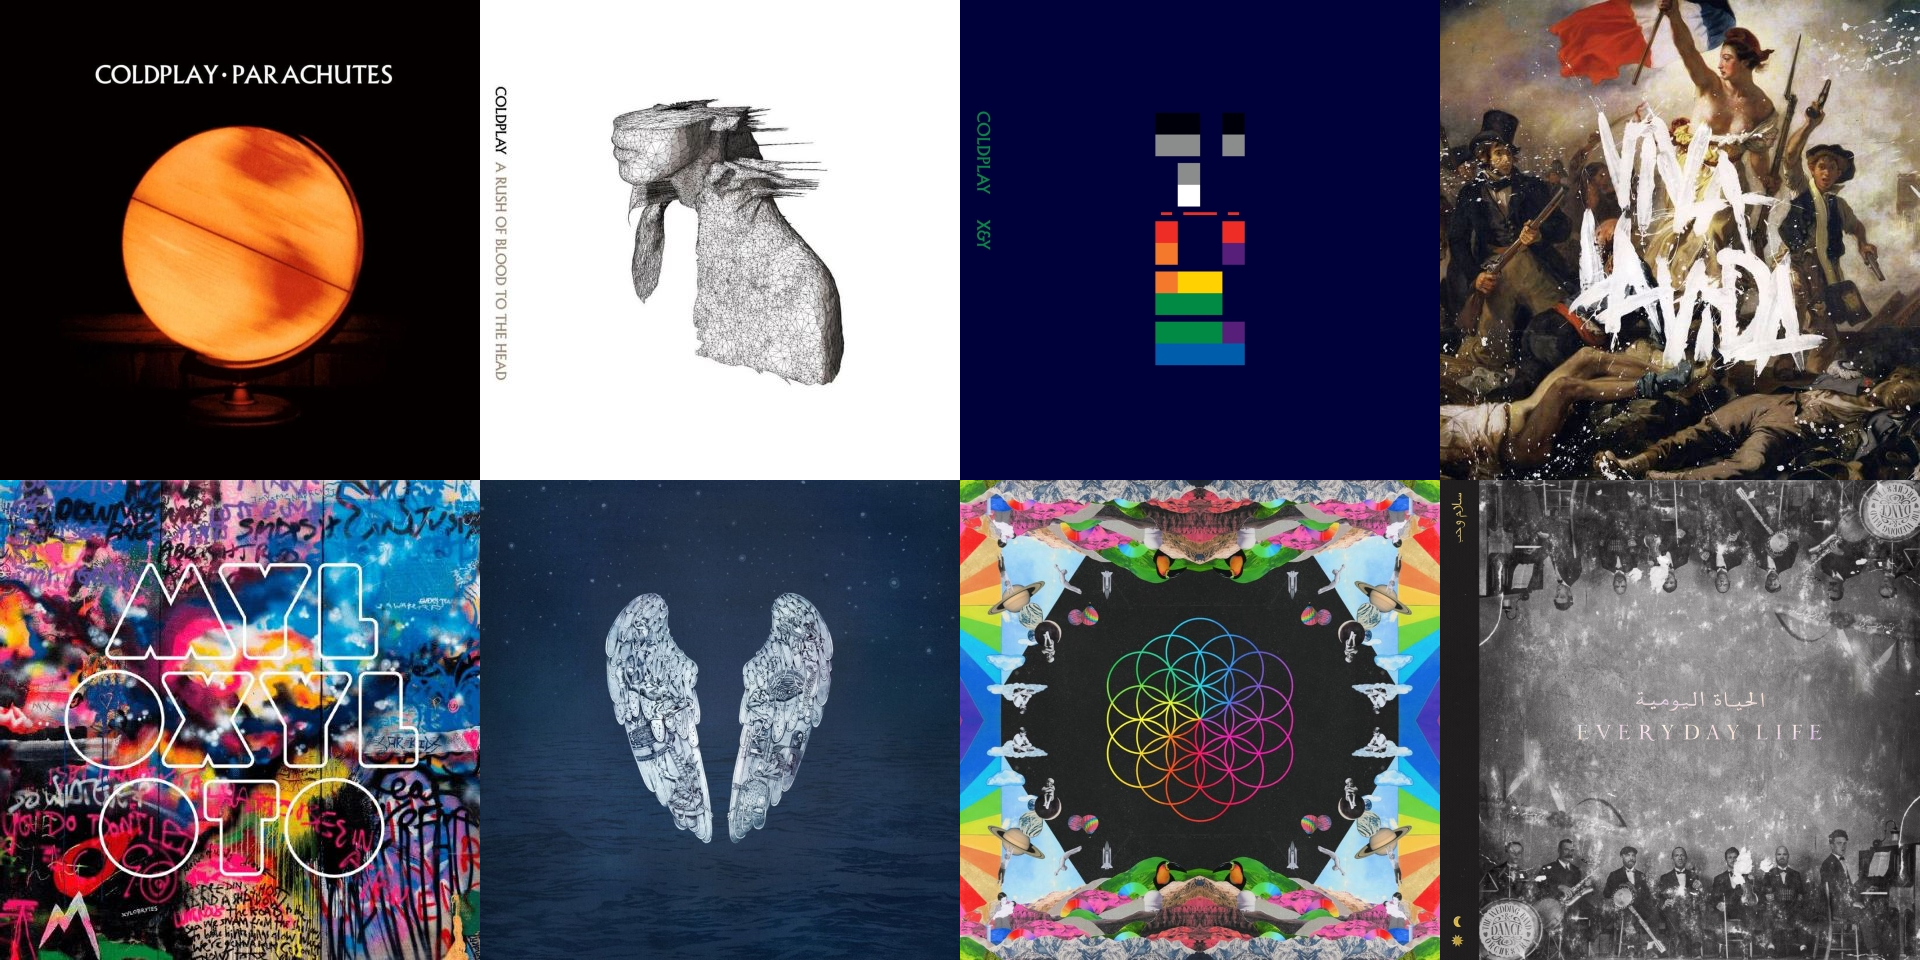 Made a simple wallpapers with every album art. [1920 x 960]: Coldplay